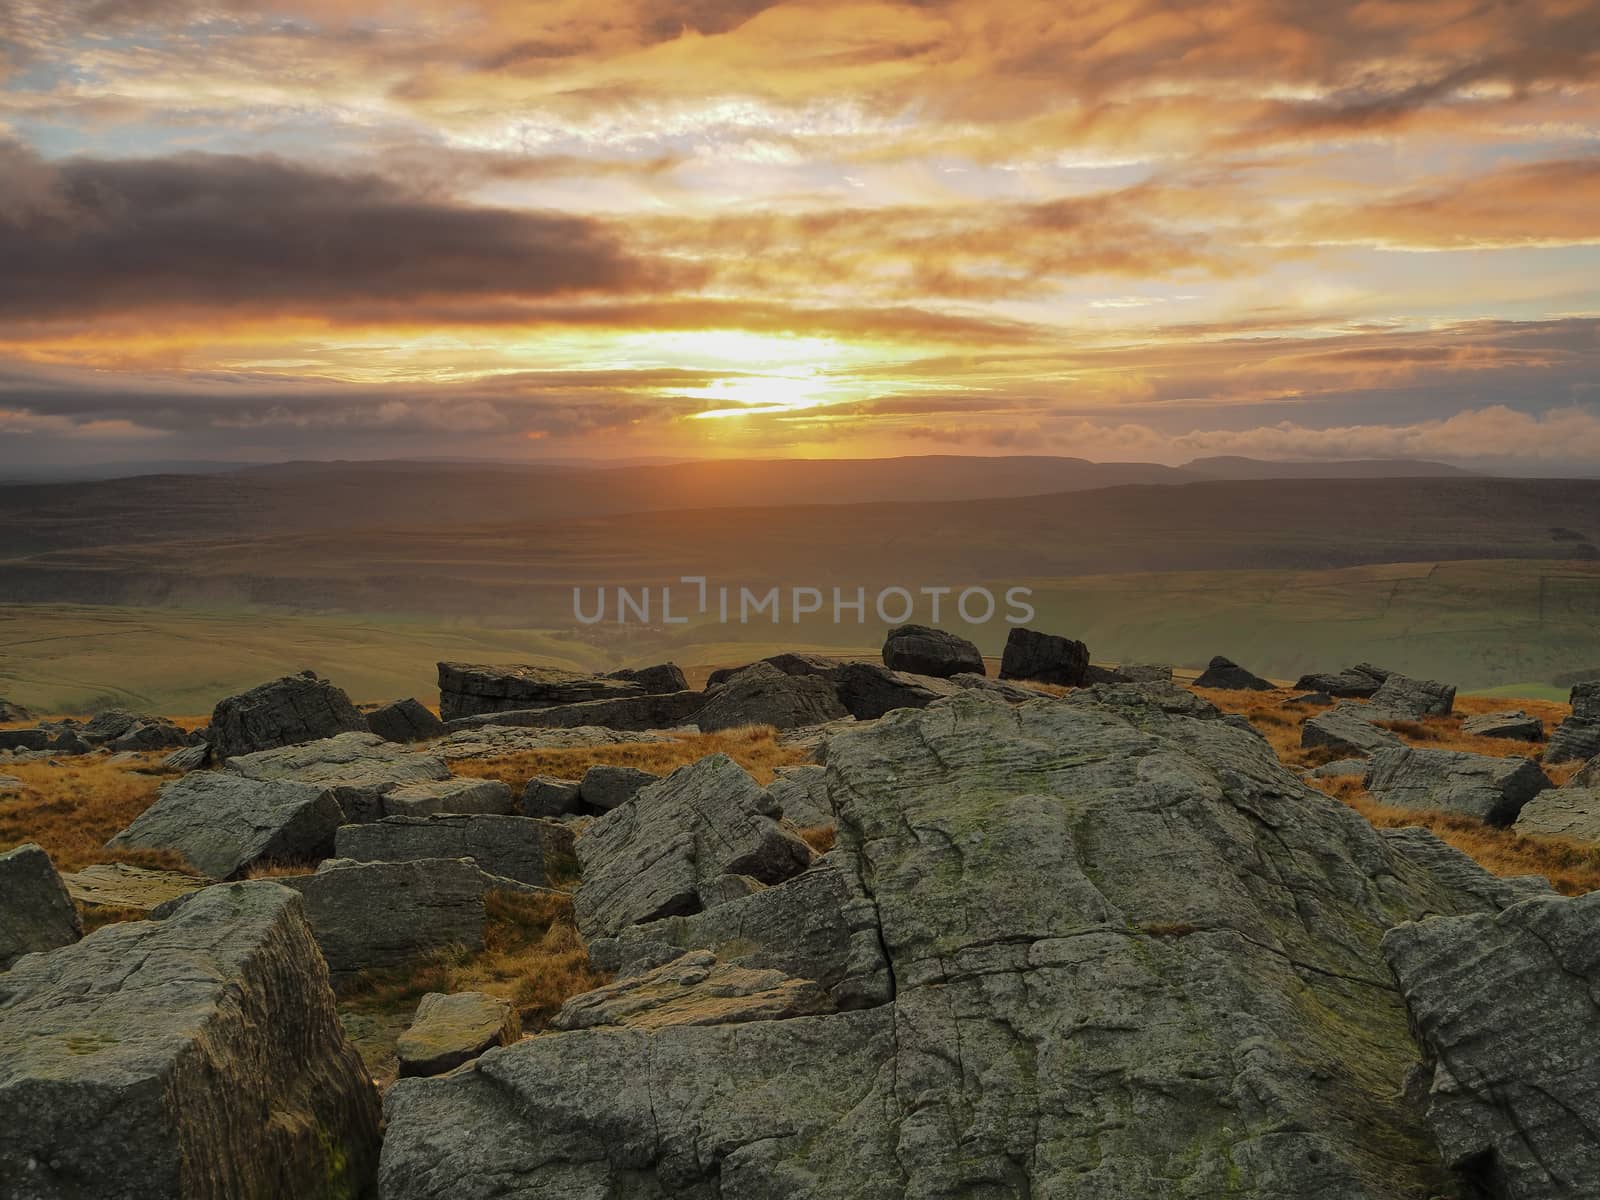 Stunning sunset from the rocky outcrop at the top of Great Whernside overlooking Kettlewell, Wharfedale, Yorkshire Dales, UK